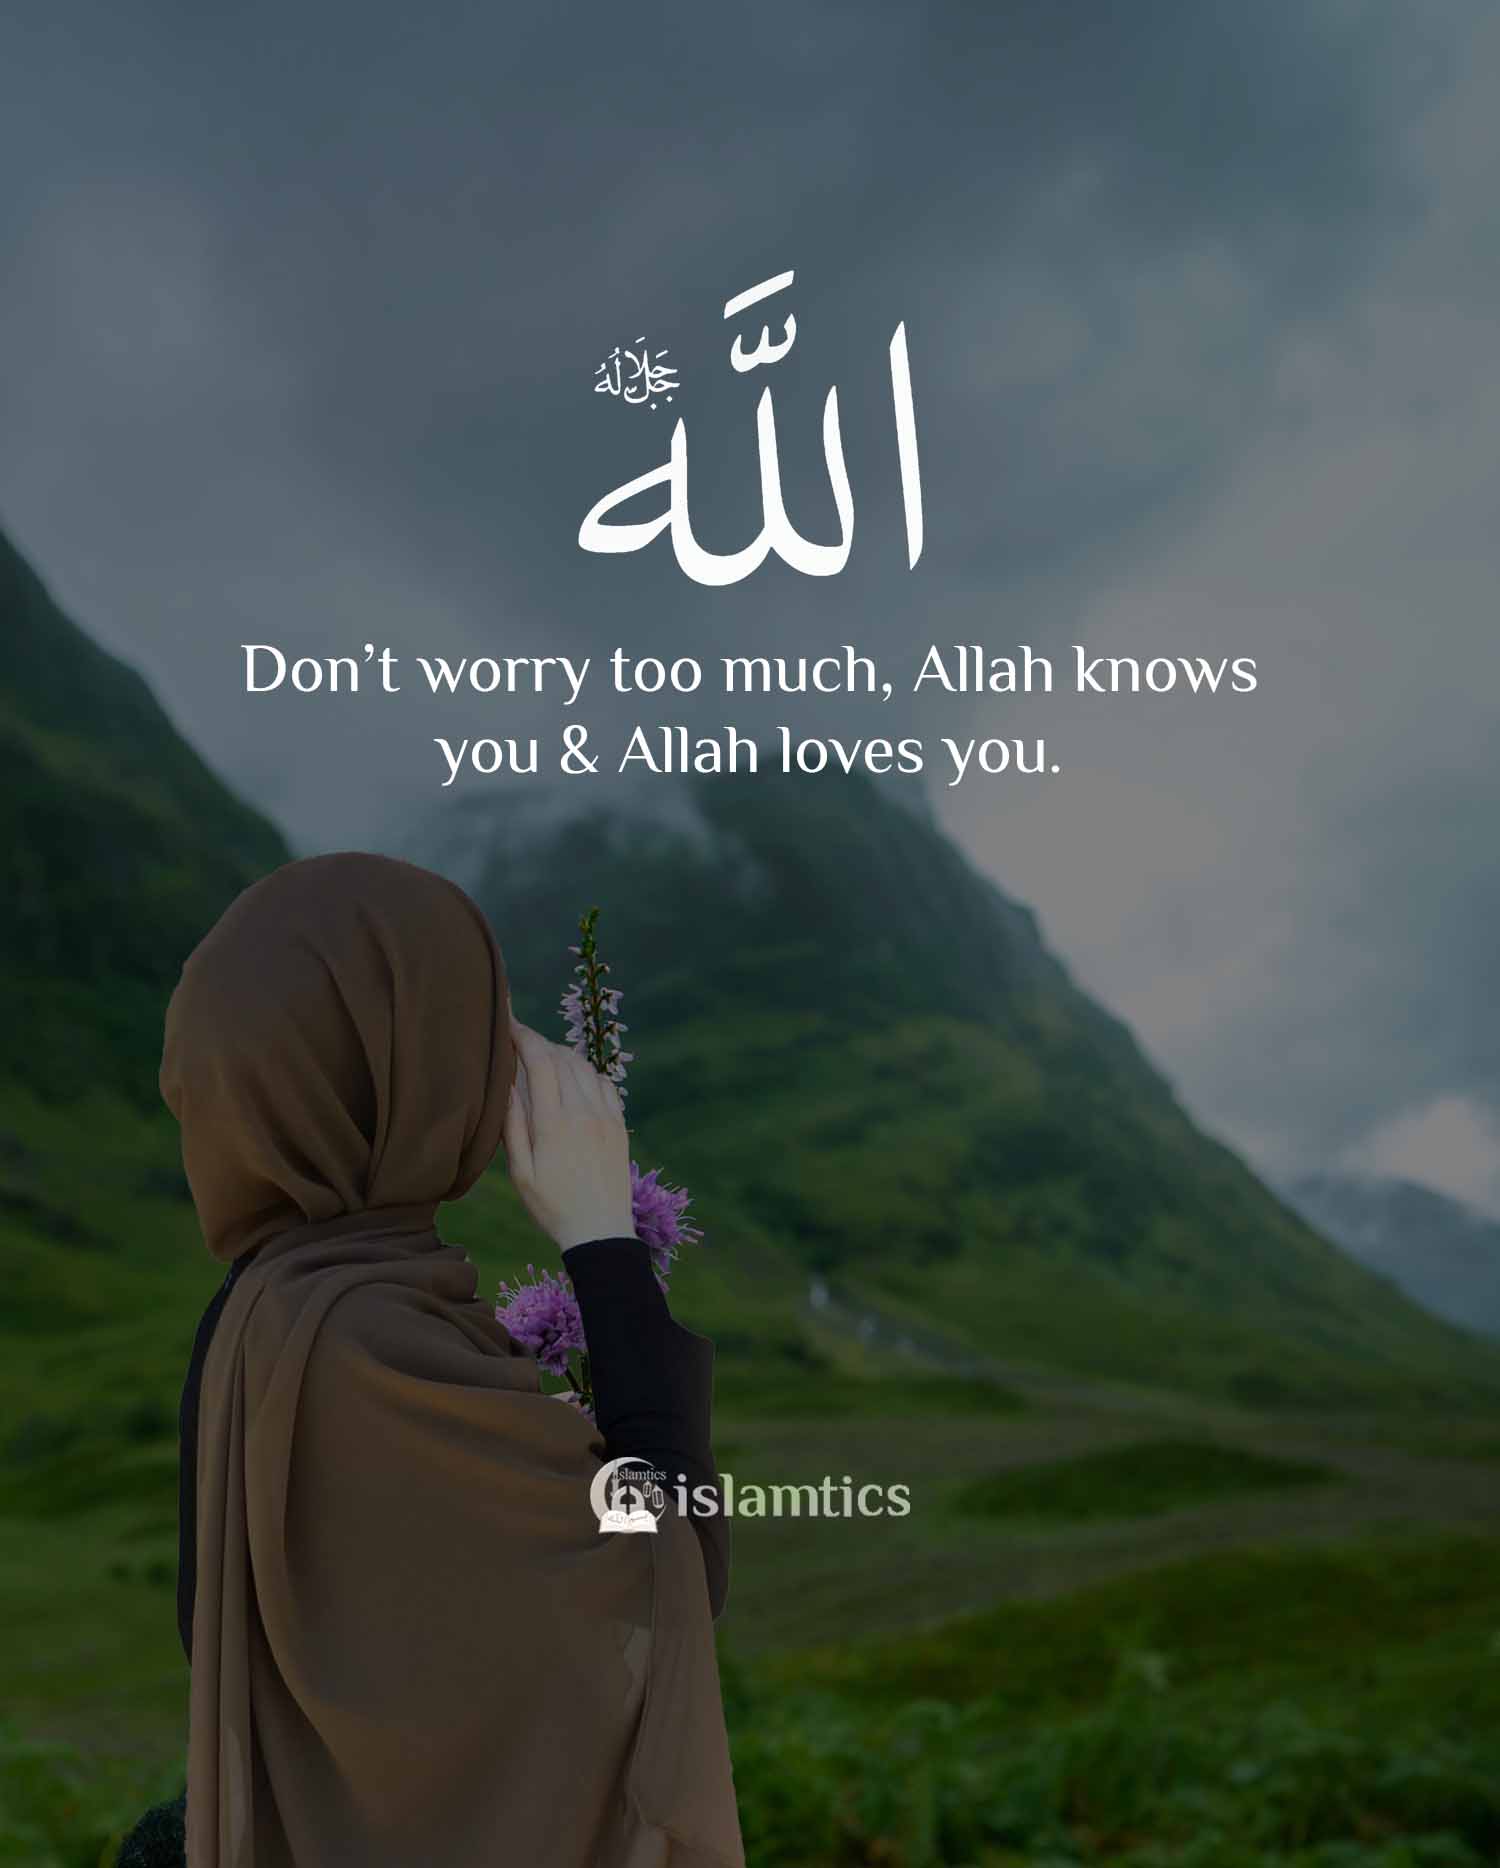 Don’t worry too much, Allah knows you & Allah loves you. | islamtics